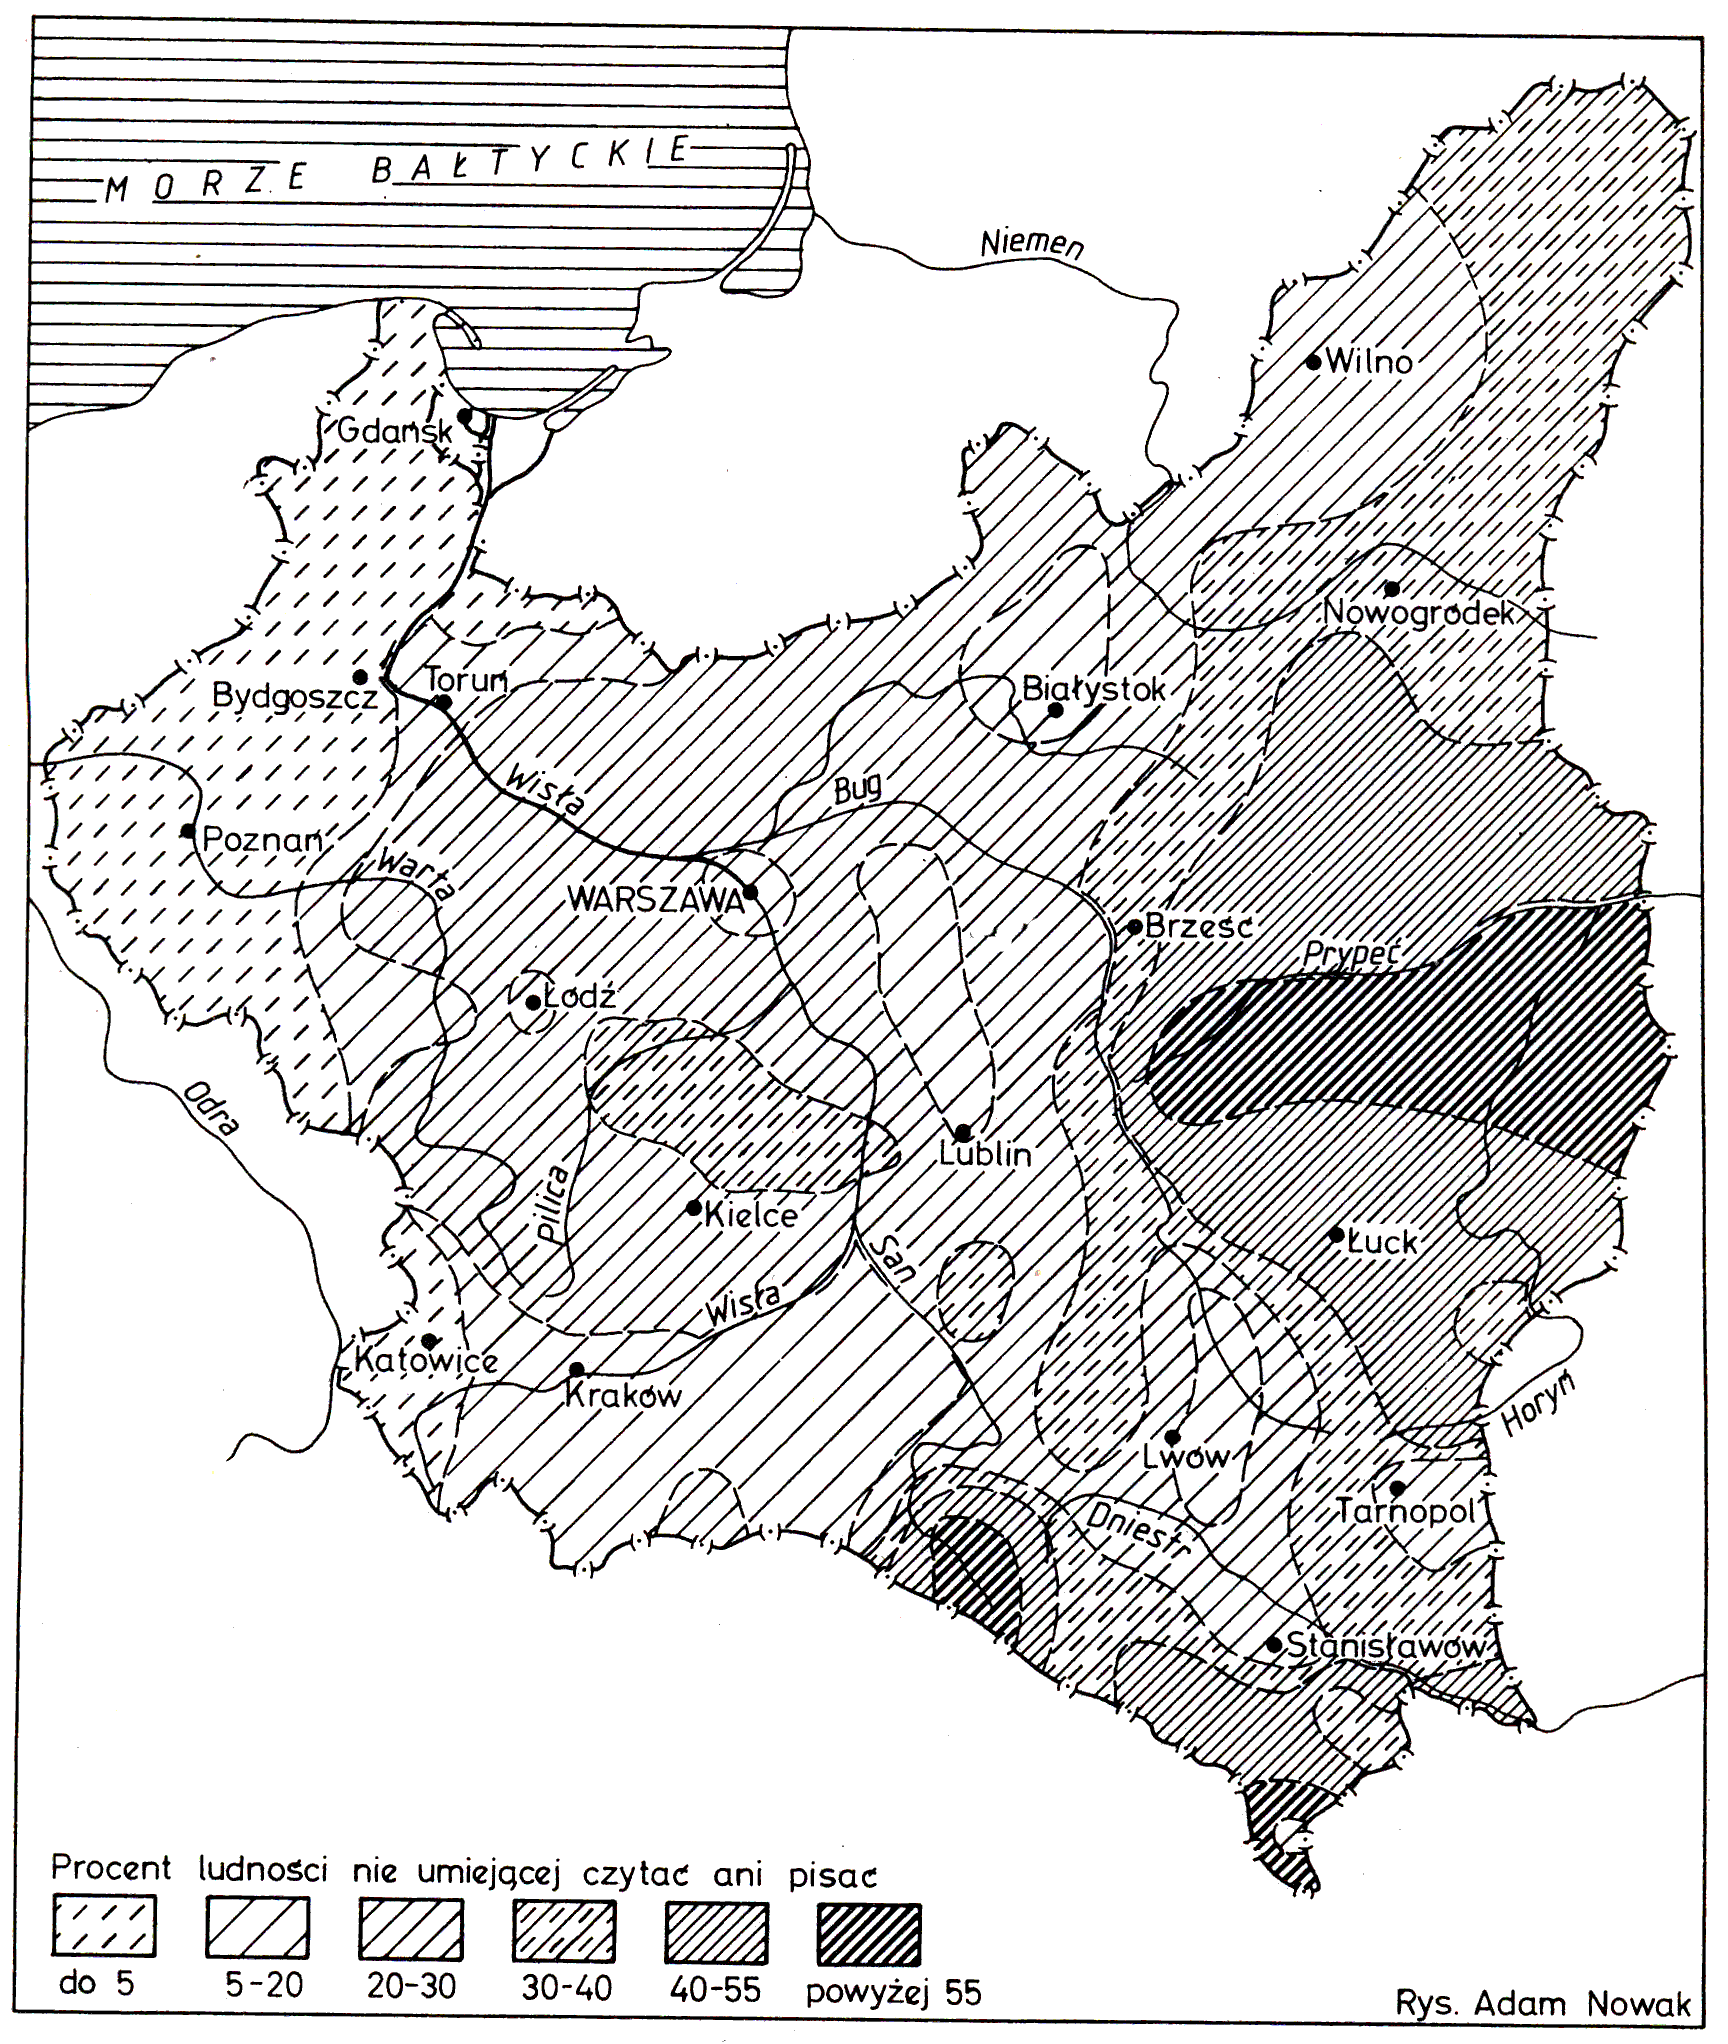 http://upload.wikimedia.org/wikipedia/commons/d/d5/HistPol-analfabetyzm1931.png?uselang=pl